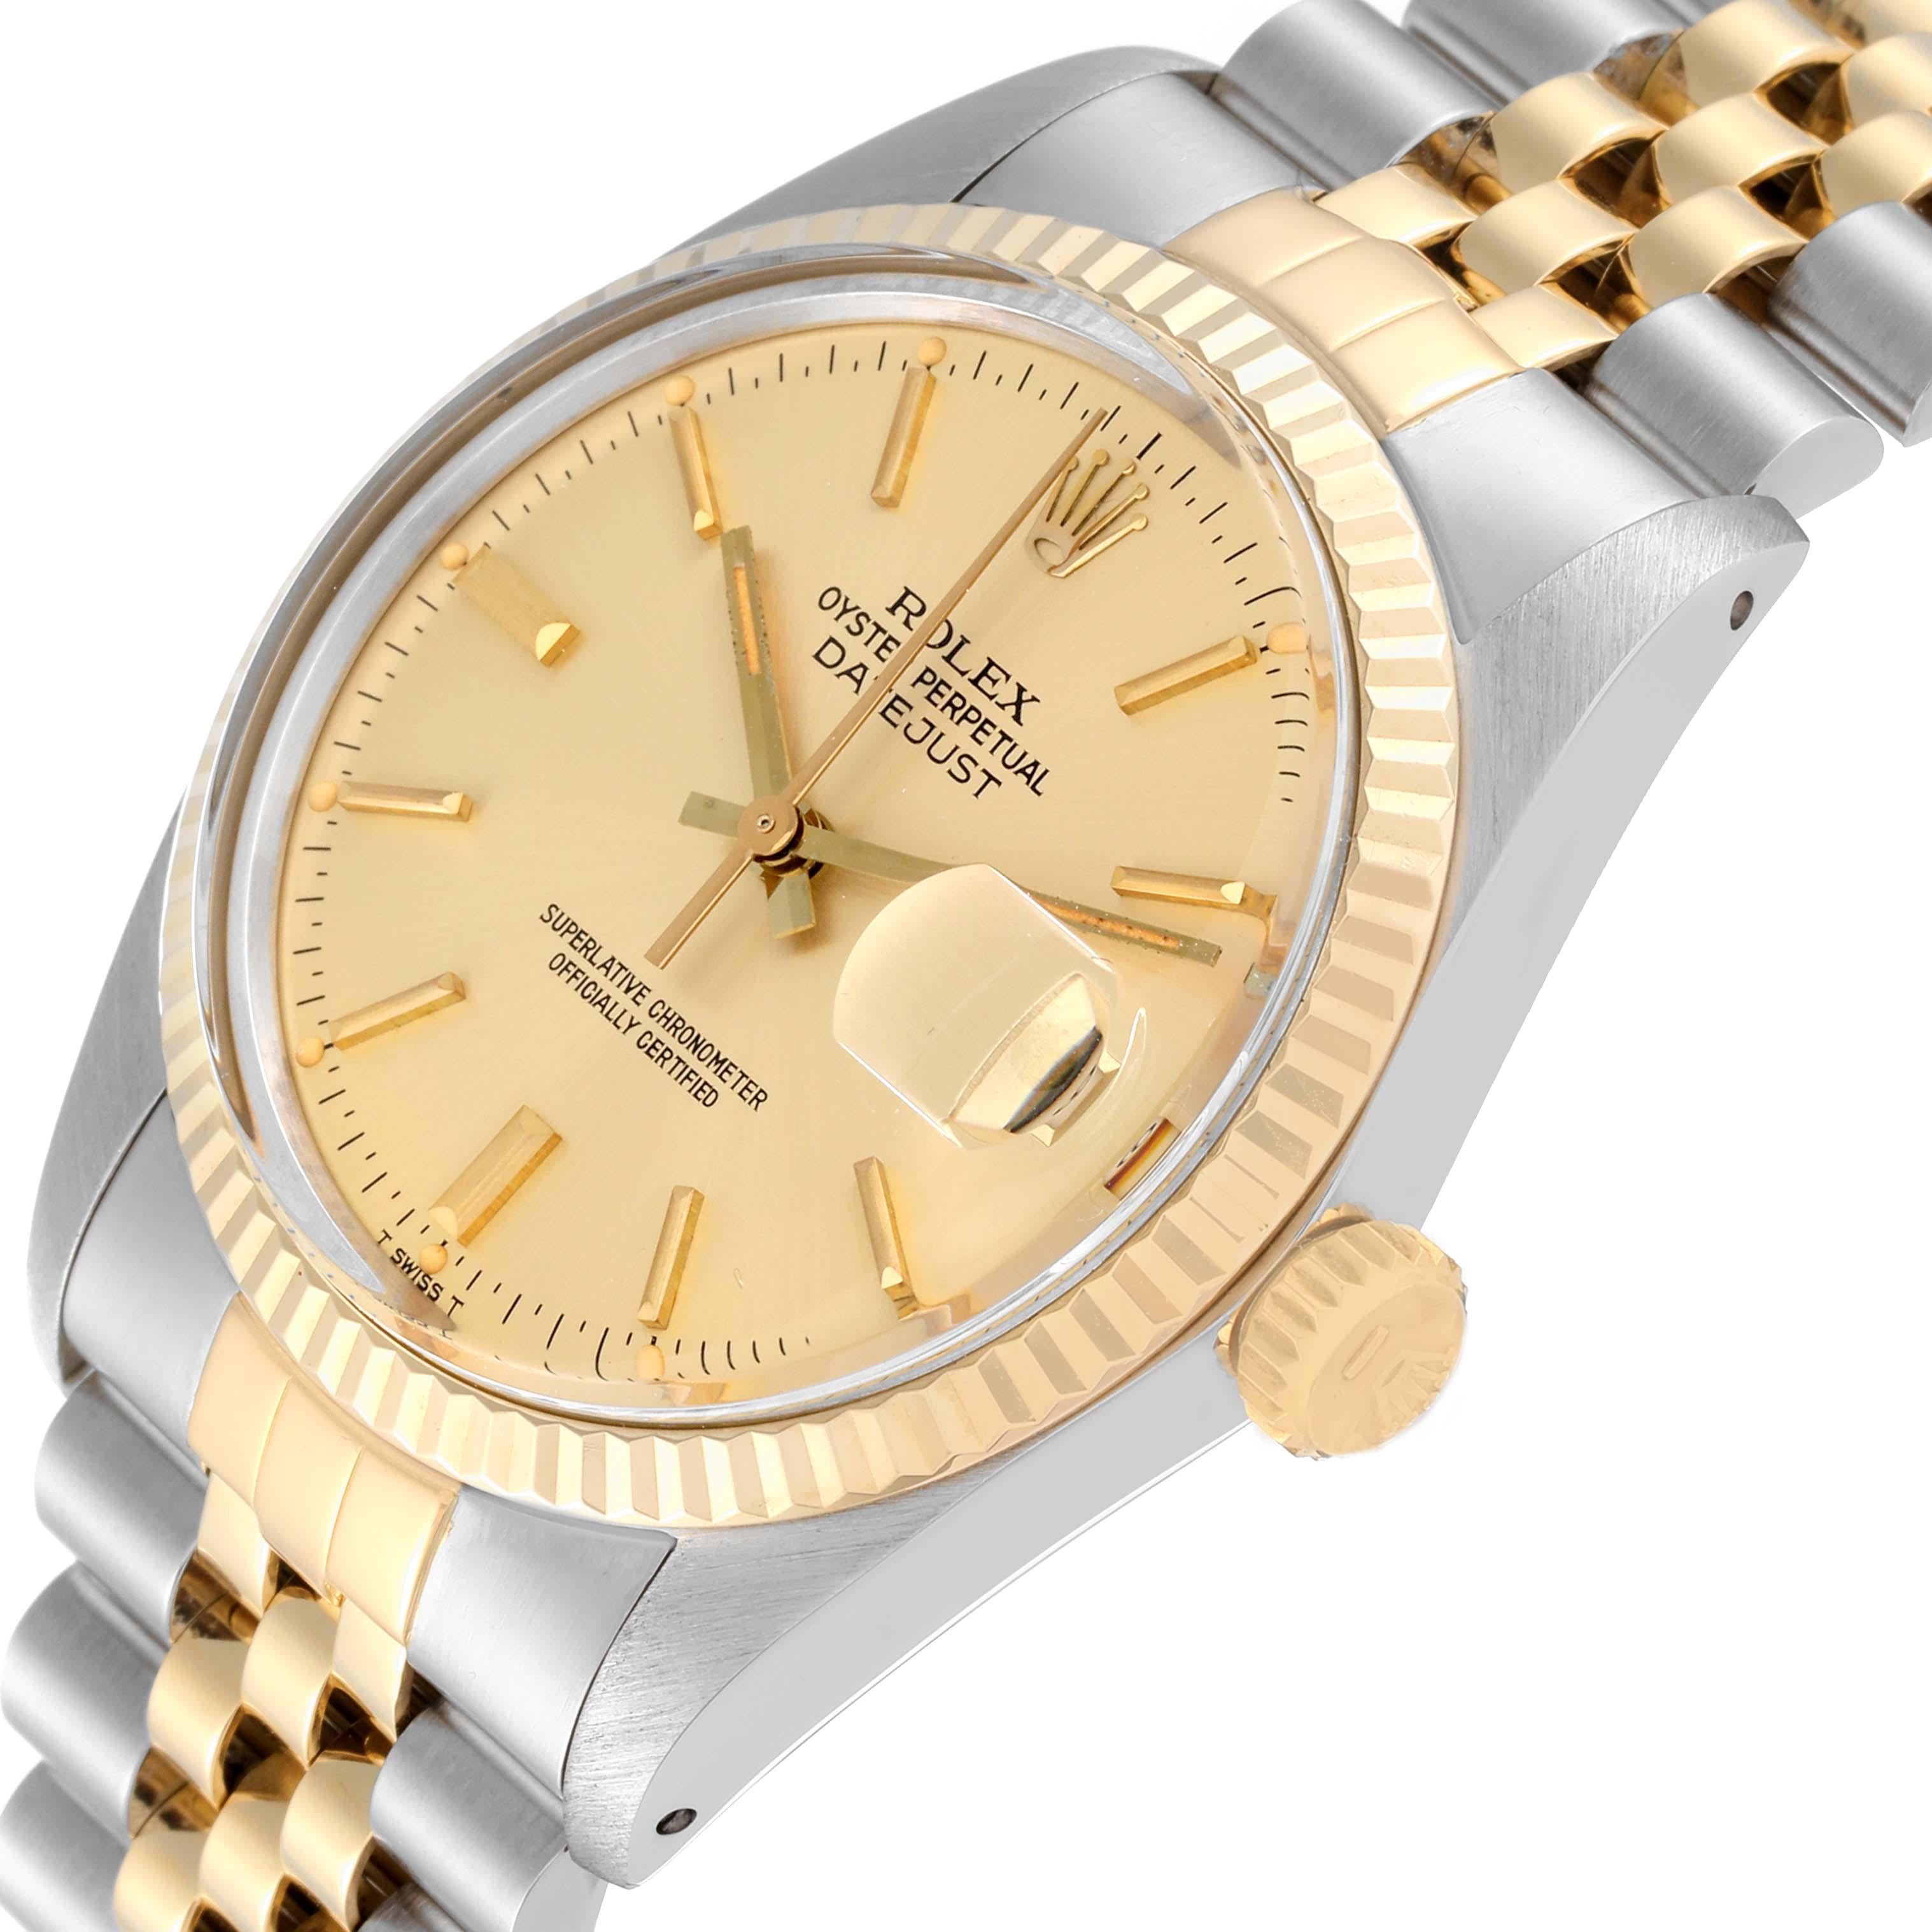 Rolex Datejust Steel Yellow Gold Vintage Mens Watch 16013 Box Papers 1